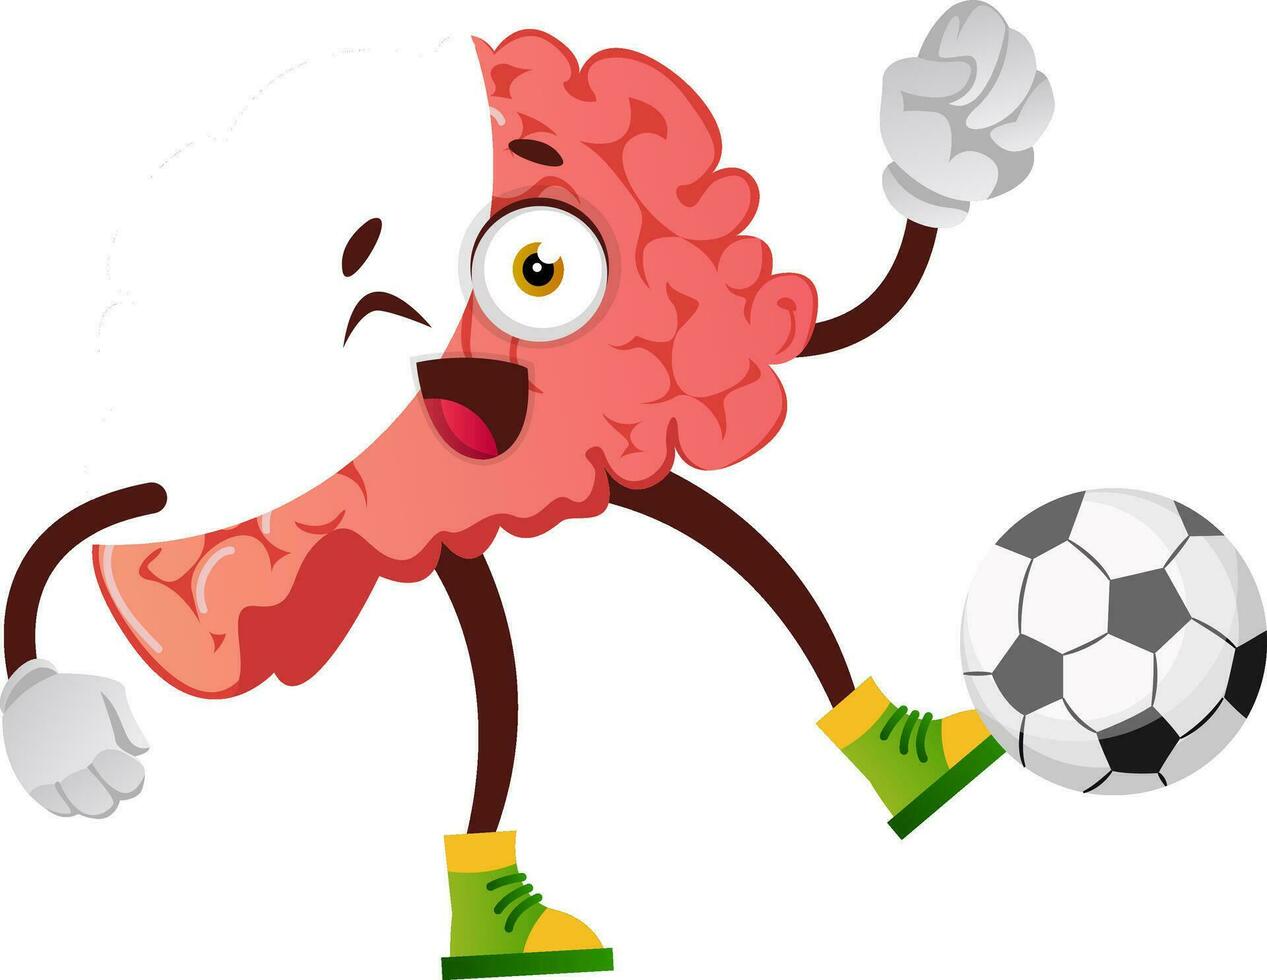 Brain is playing football, illustration, vector on white background.